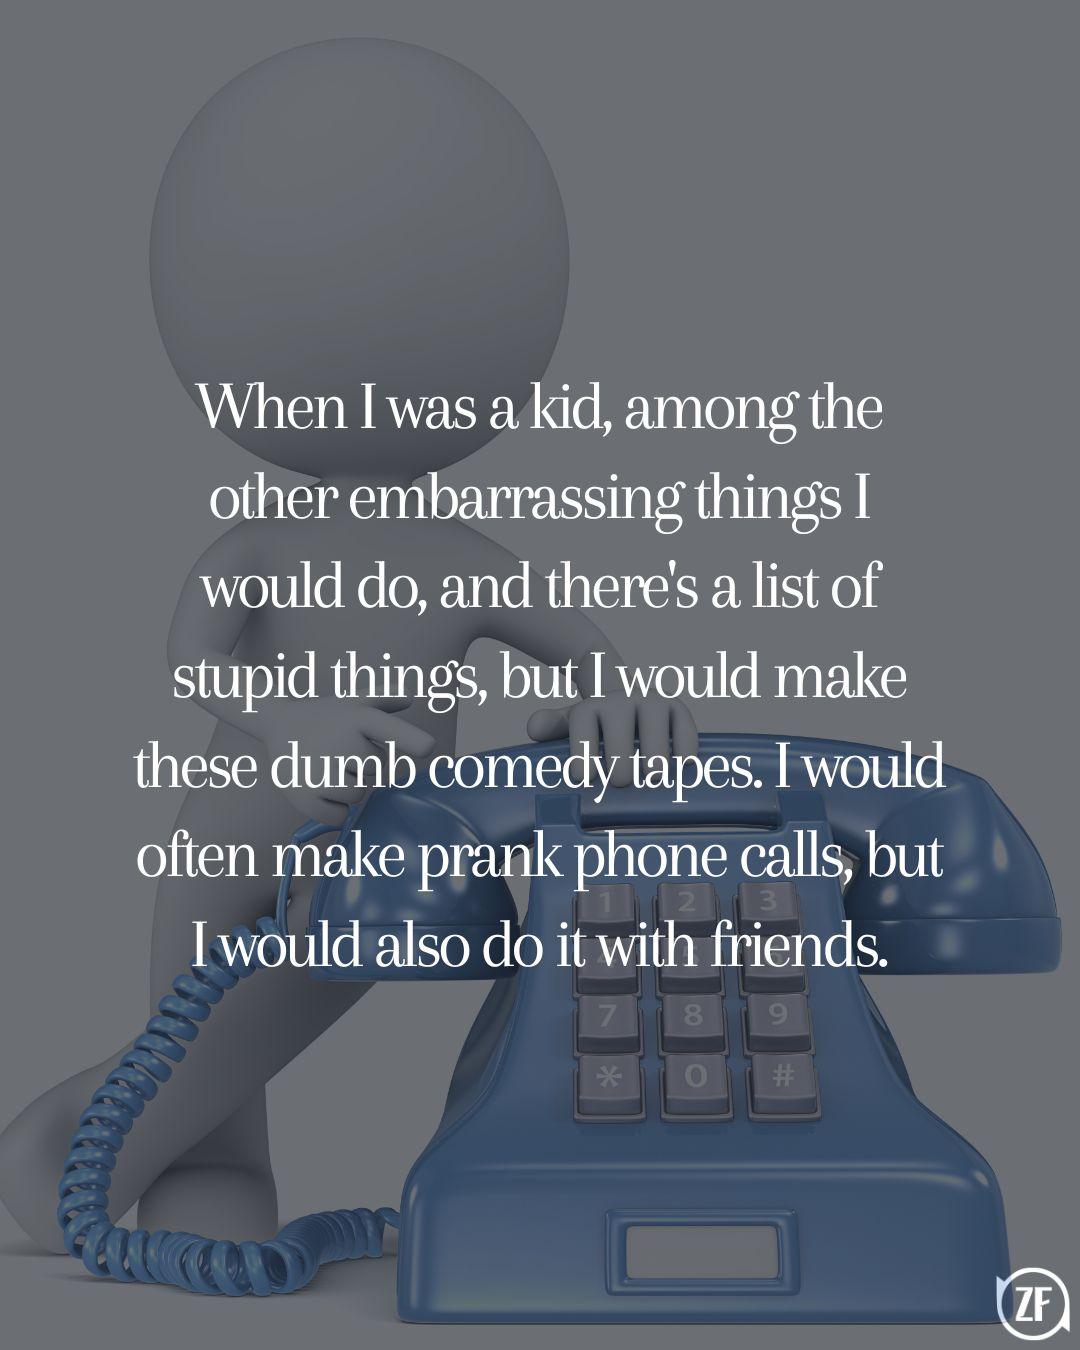 When I was a kid, among the other embarrassing things I would do, and there's a list of stupid things, but I would make these dumb comedy tapes. I would often make prank phone calls, but I would also do it with friends.